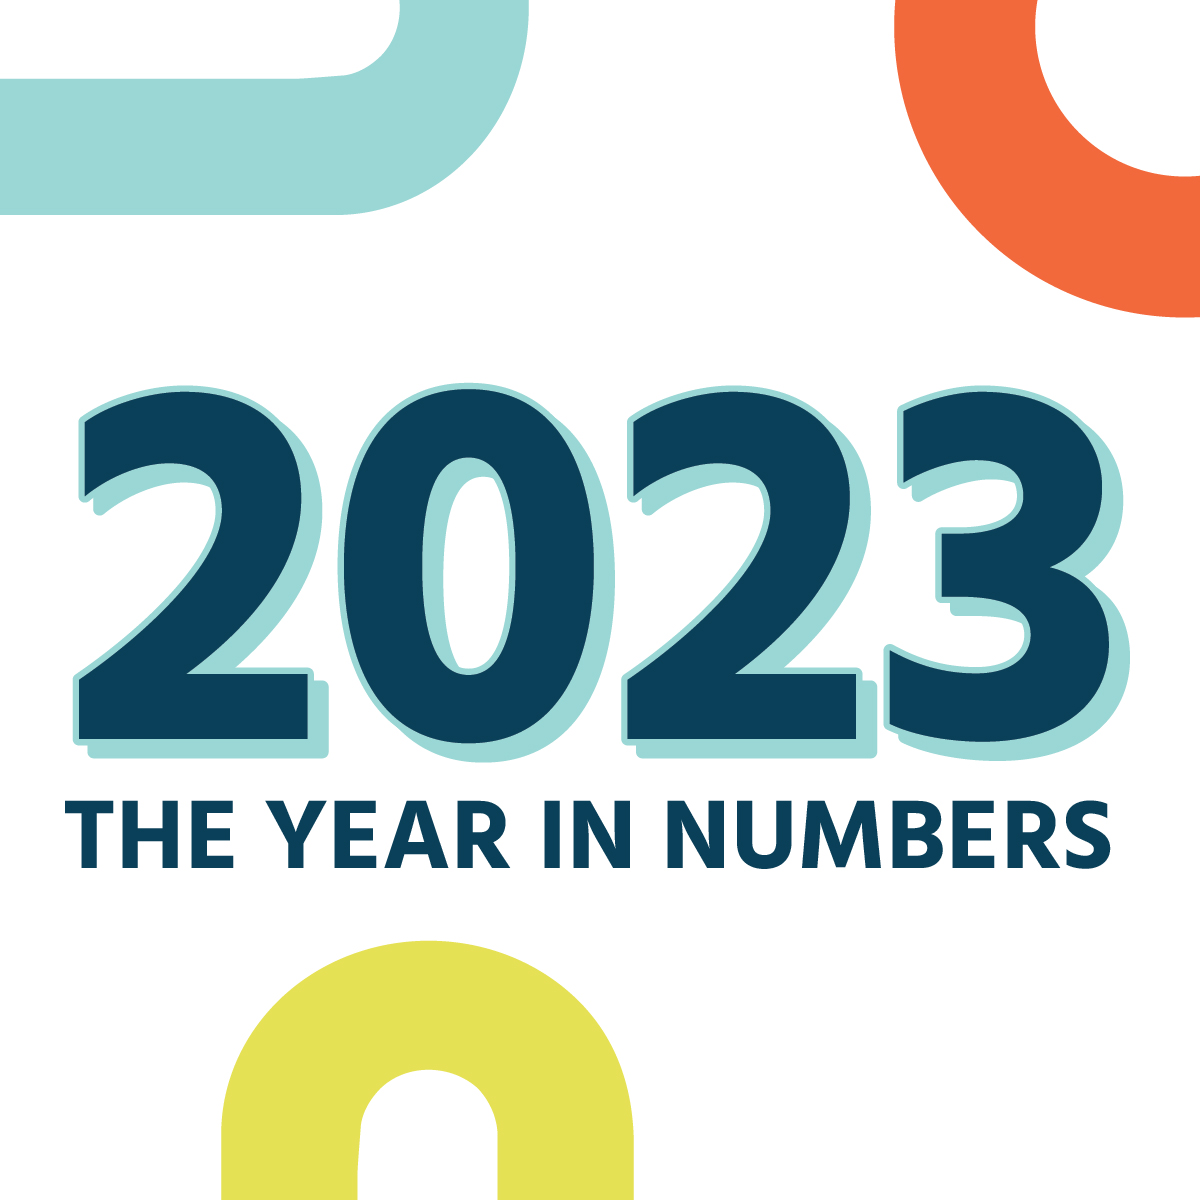 Graphic reading "2023 The Year In Numbers"